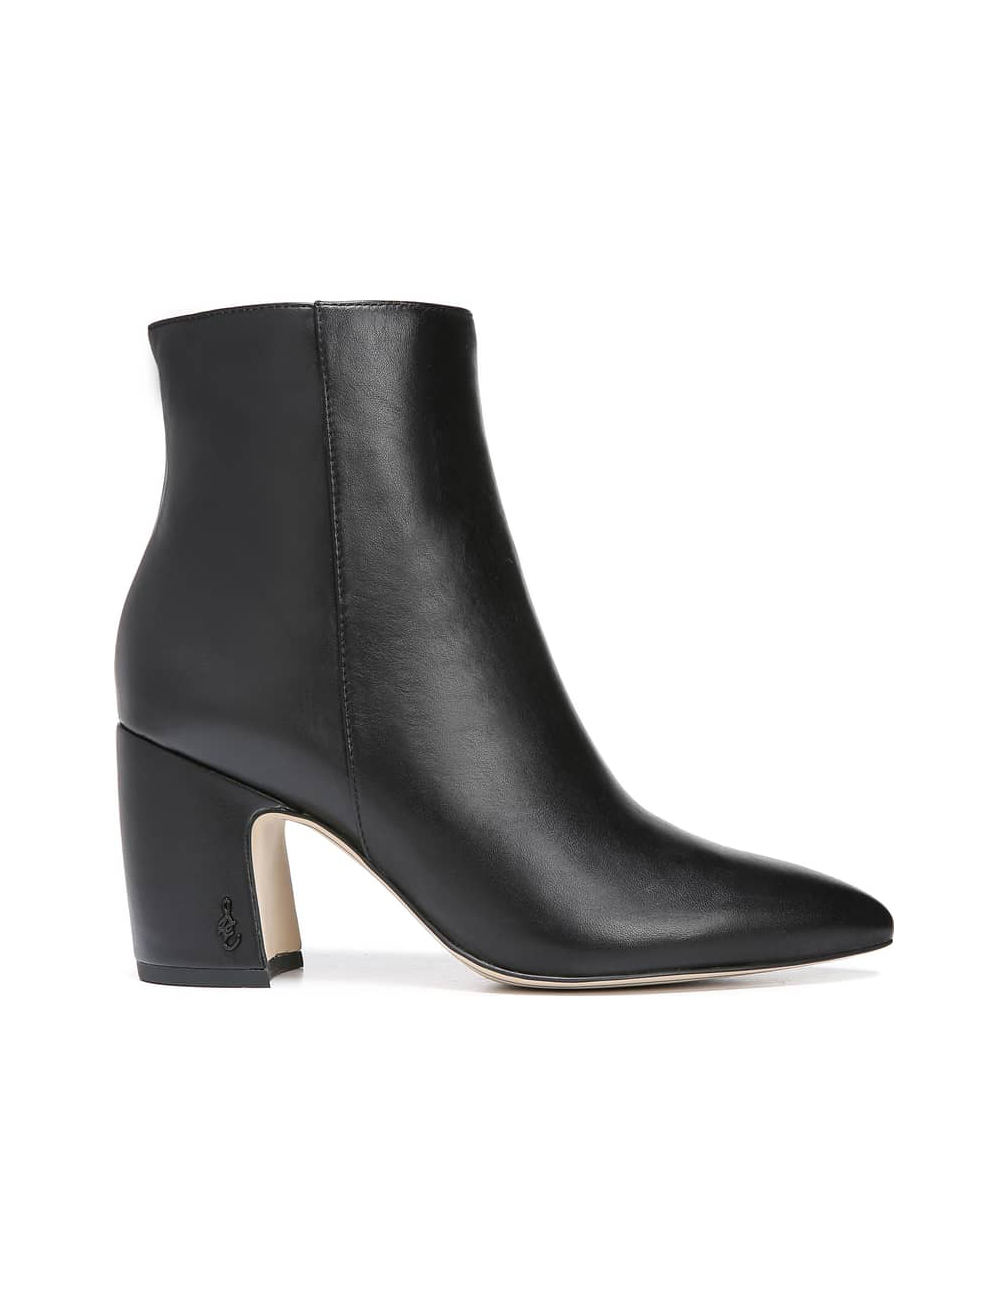 comfortable ankle boots for walking